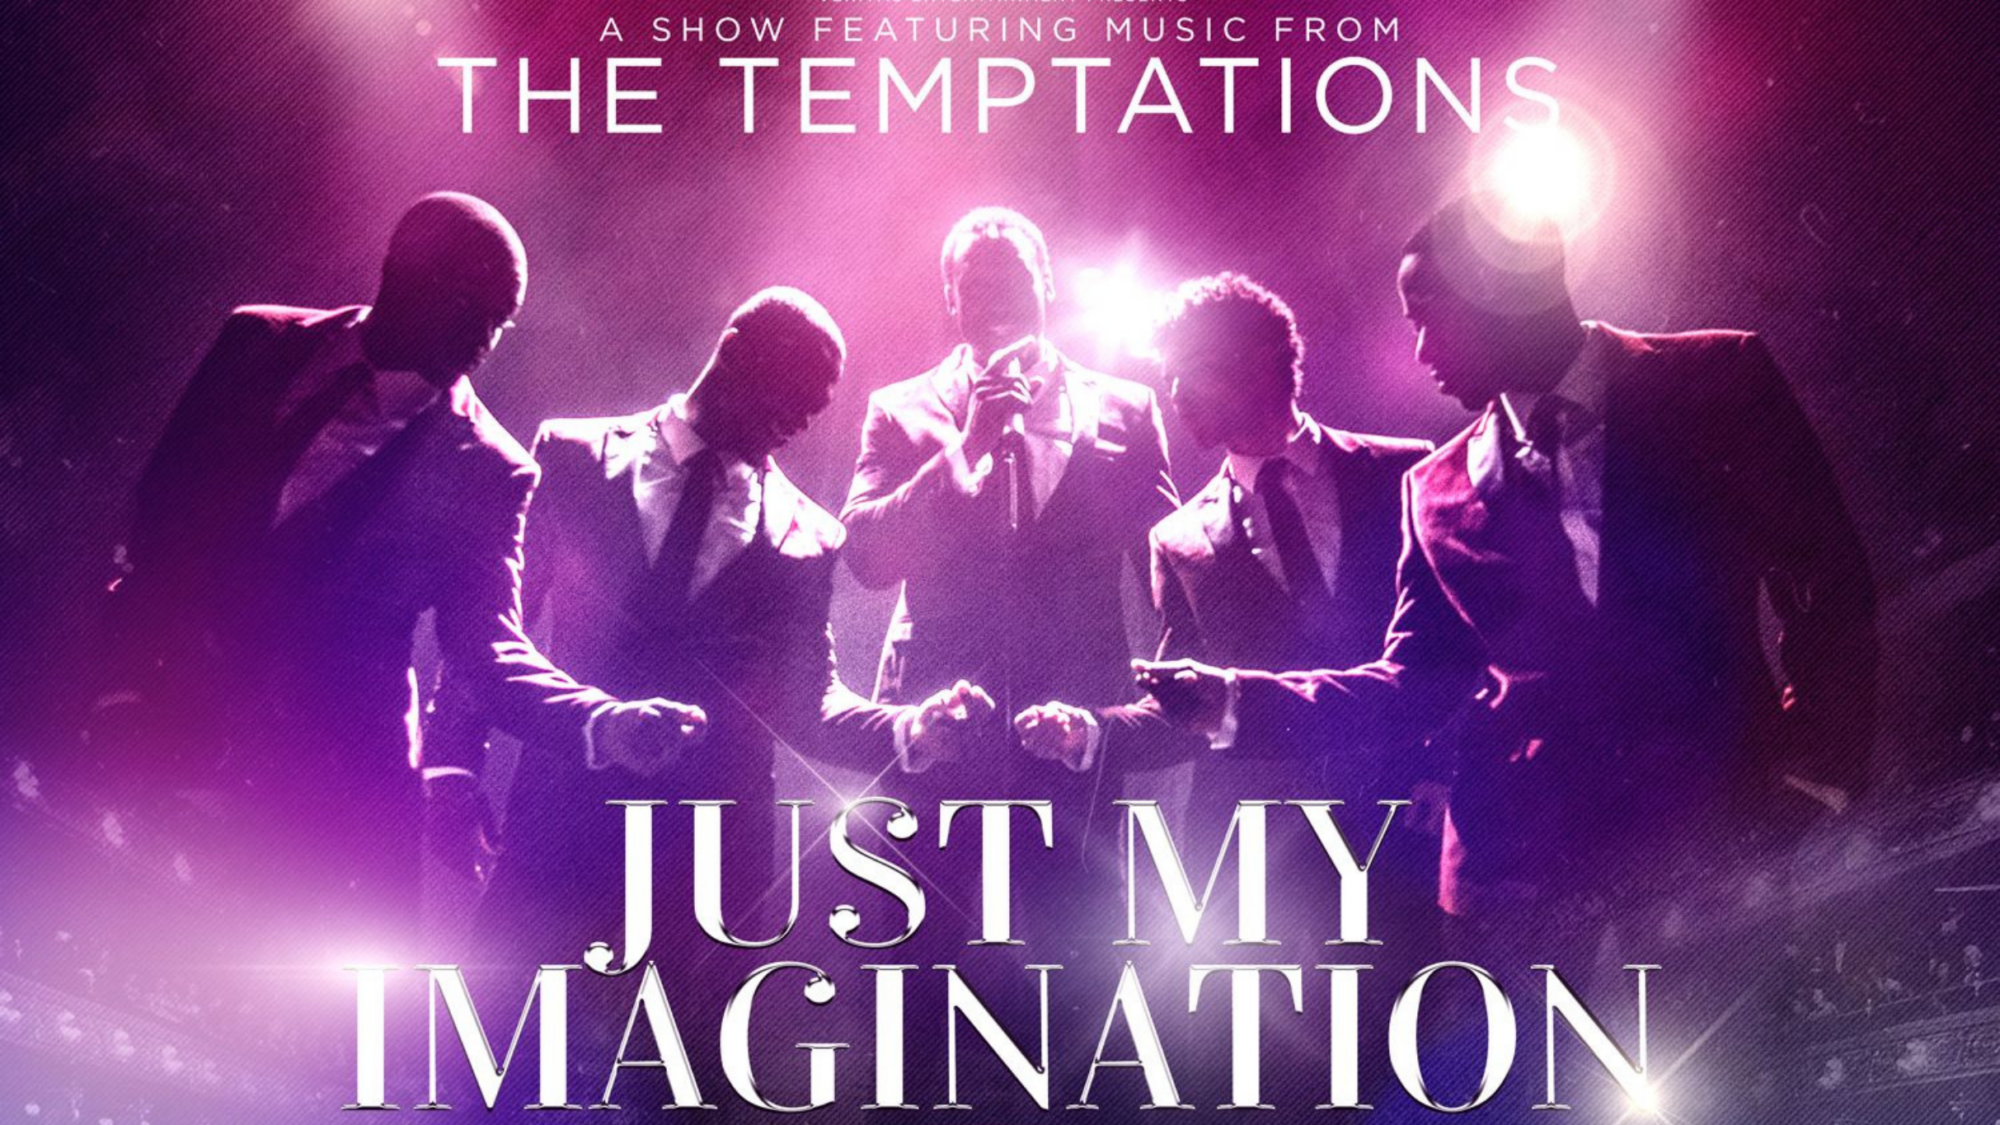 Image name Just My Imagination The Music of the Temptations at Sheffield City Hall Oval Hall Sheffield the 1 image from the post Just My Imagination - The Music of the Temptations at Sheffield City Hall Oval Hall, Sheffield in Yorkshire.com.